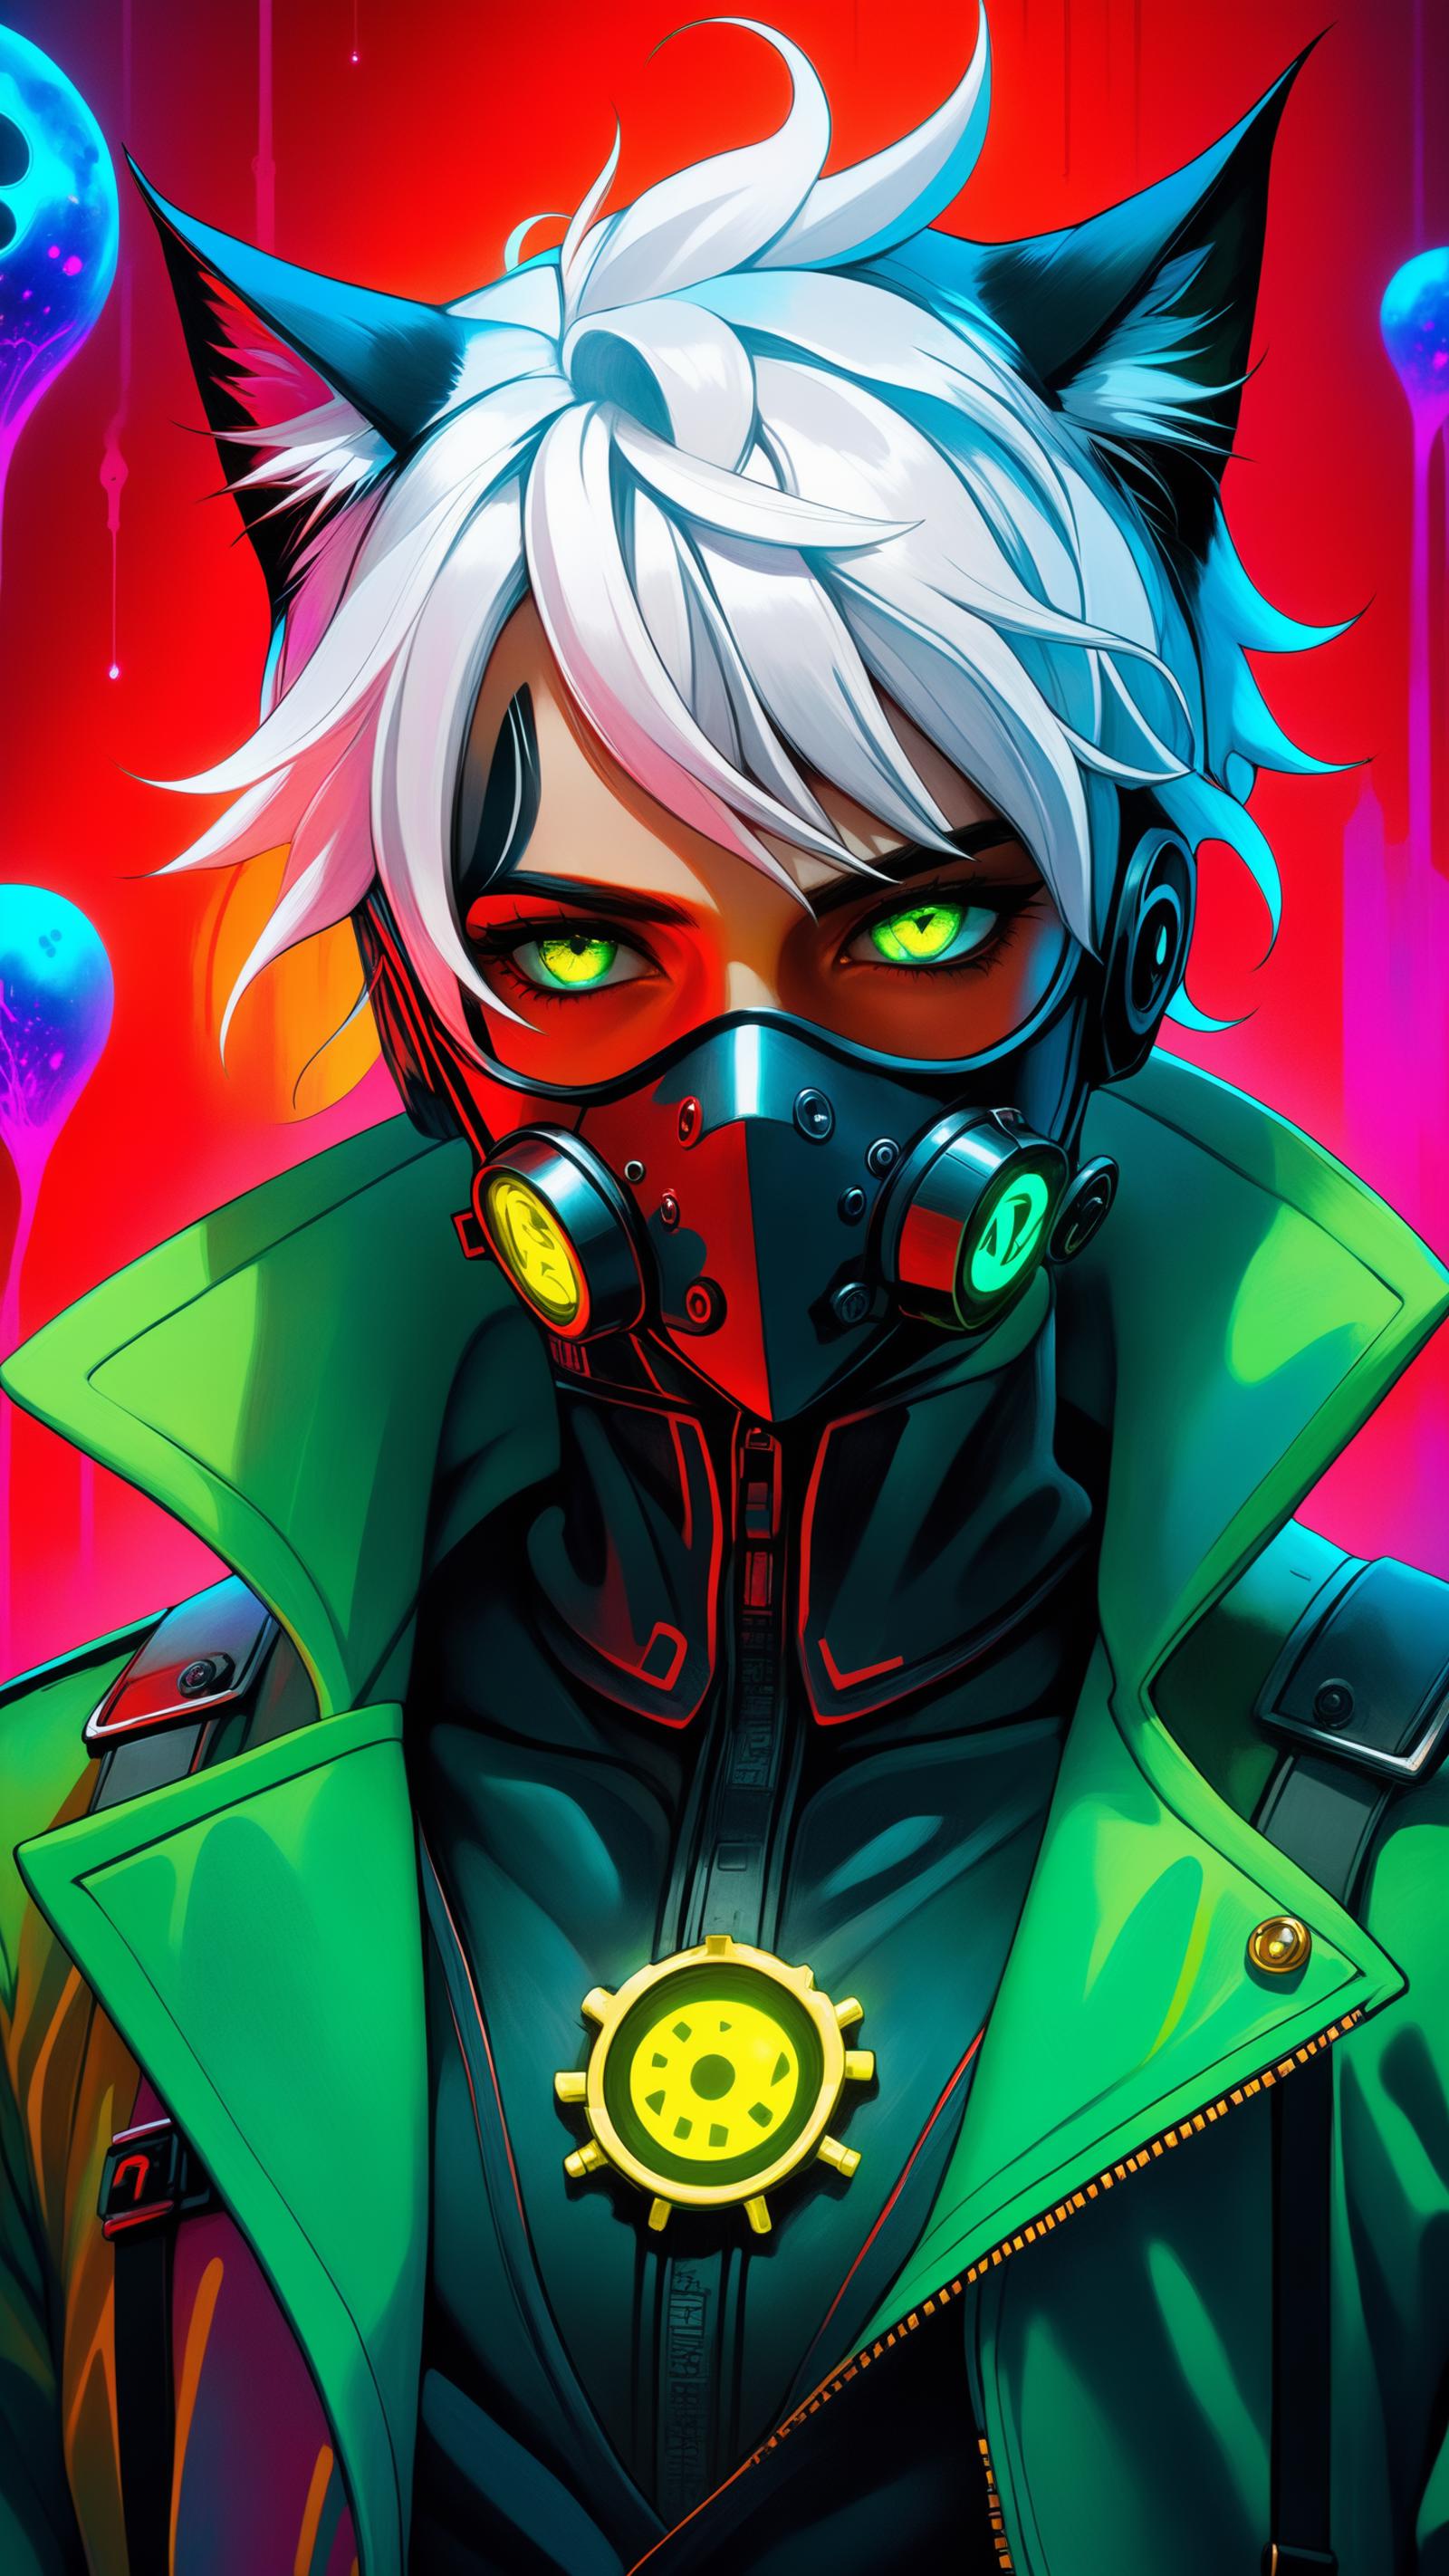 The image features a female character wearing a gas mask, a jacket, and a green hood. She is standing in front of a red background, and her outfit includes a green jacket and a black and red mask. The scene appears to be a colorful and futuristic setting, with the character being the main focus of the image.